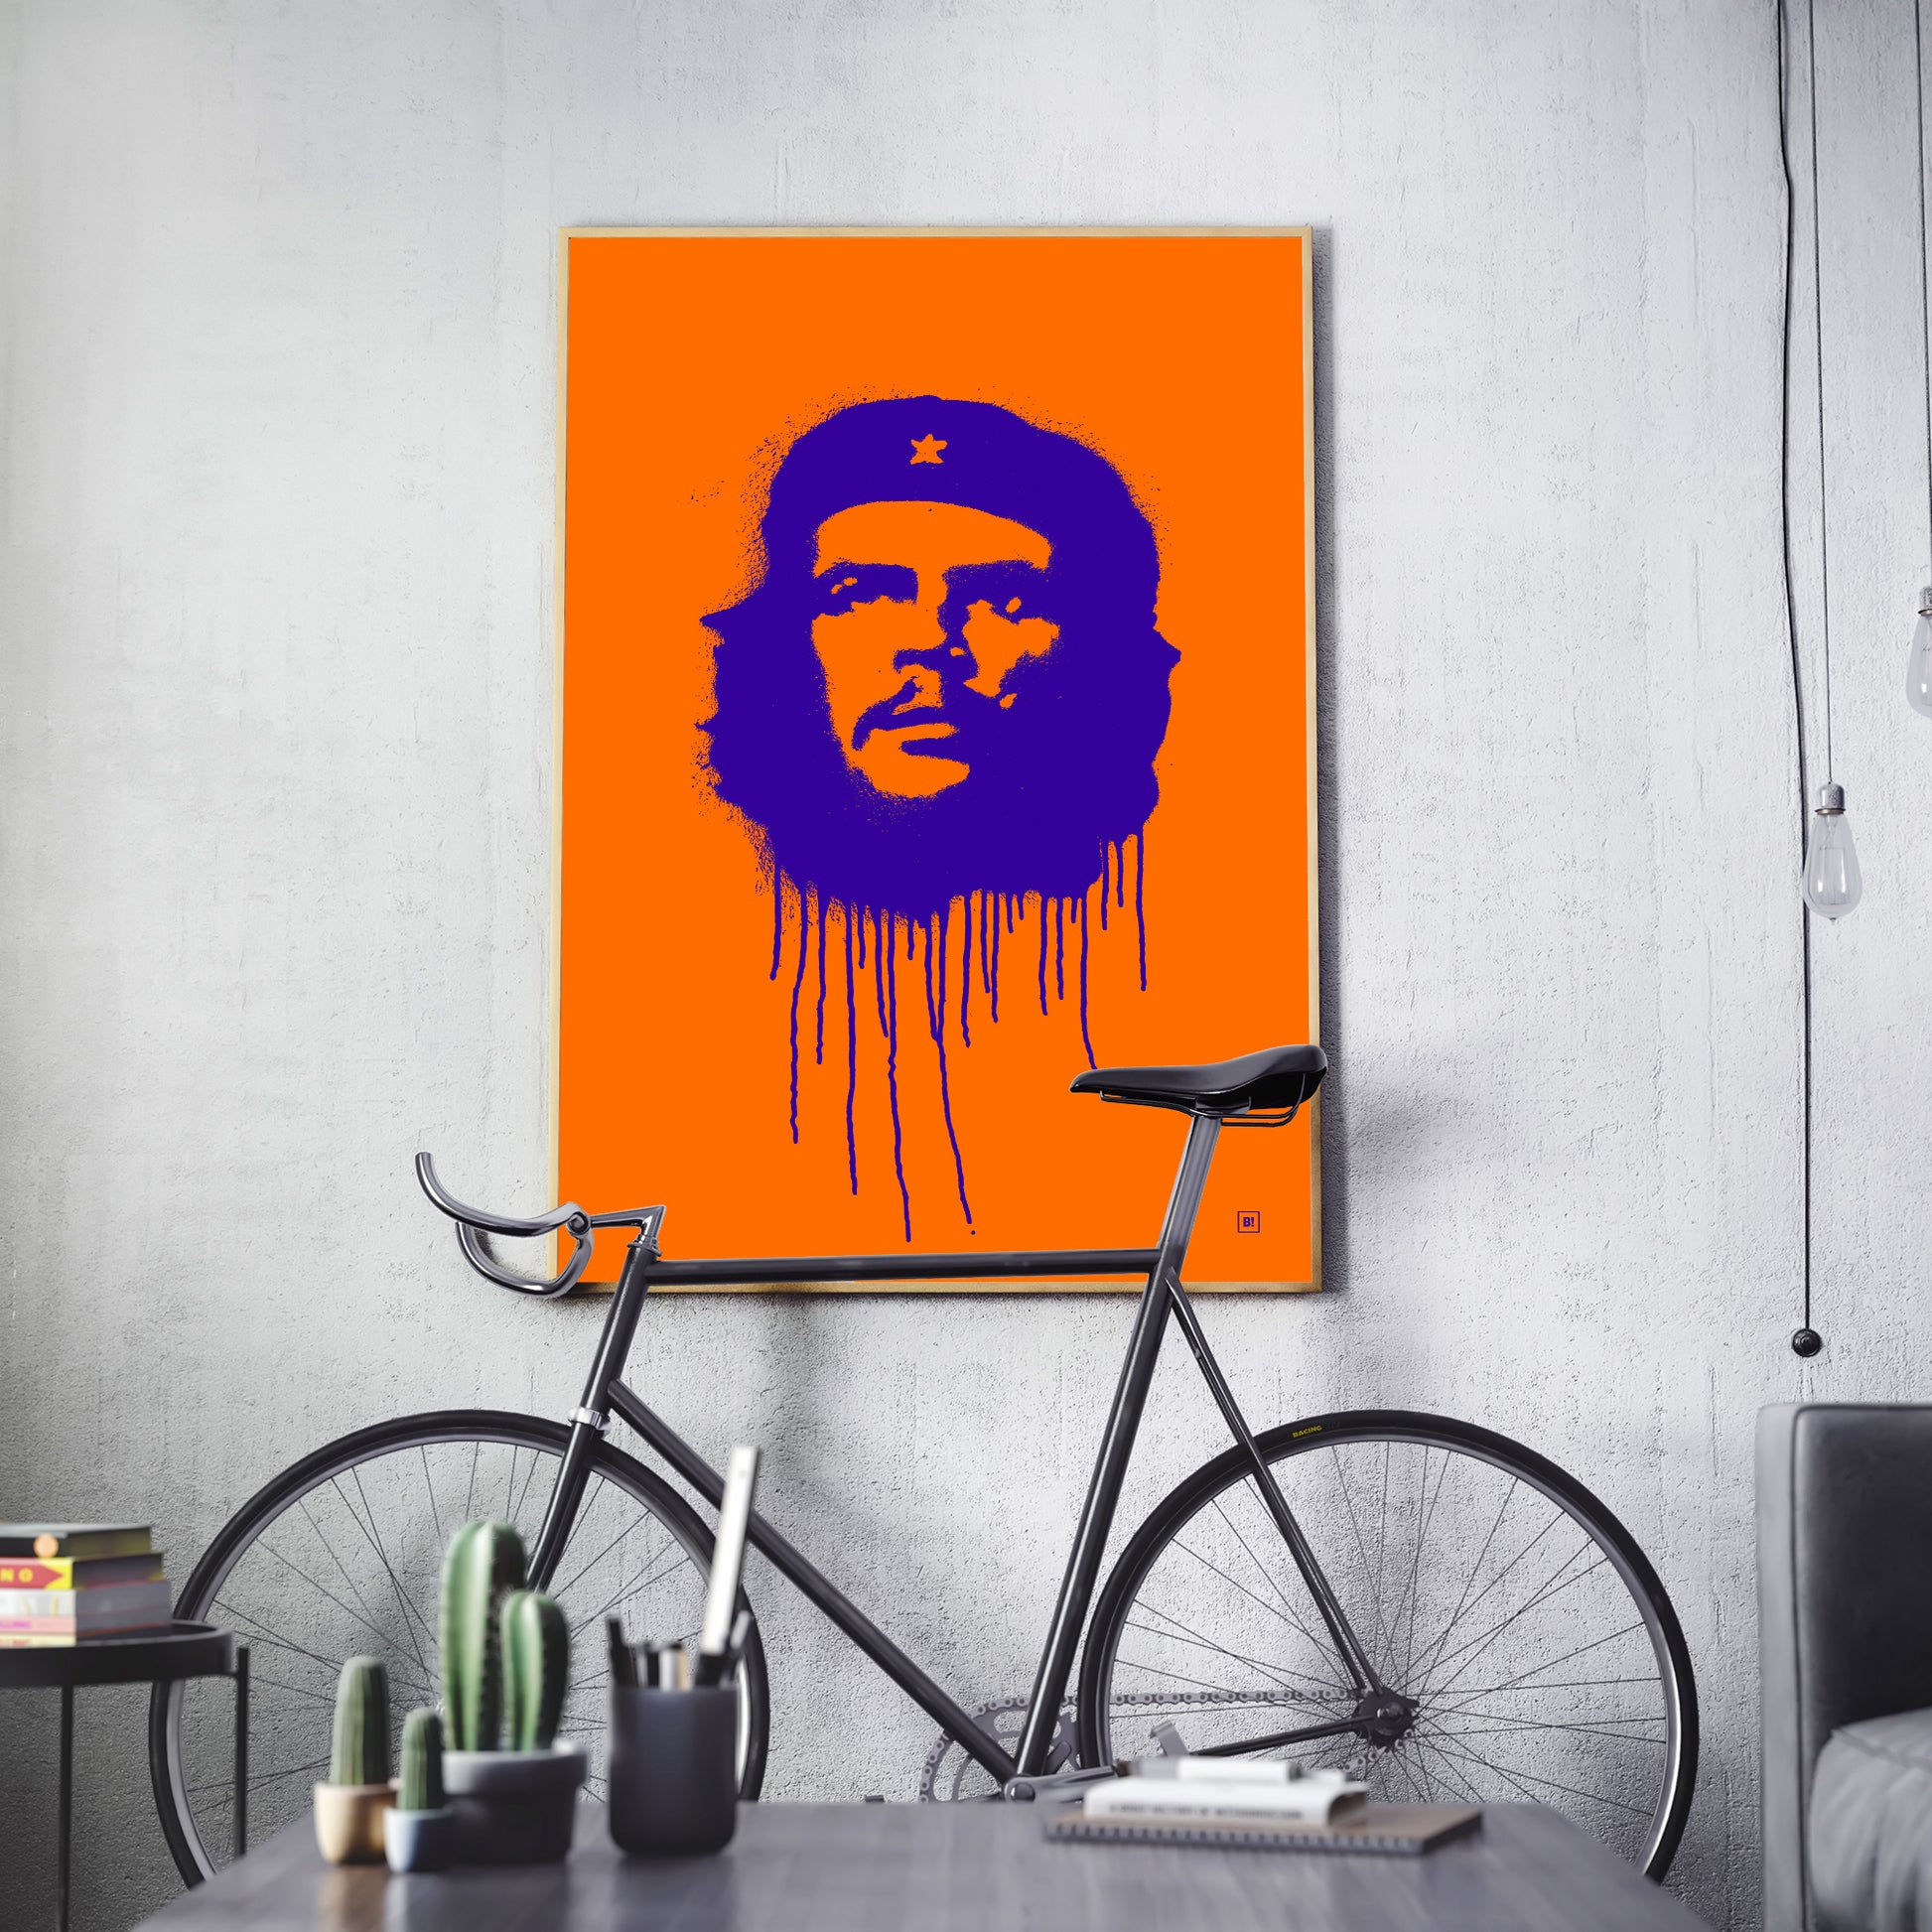 Be inspired by our pop navy "Ernesto Che Guevara" art print! This artwork was printed using the giclée process on archival acid-free paper and is presented in a thin oak frame, capturing its timeless beauty in every detail.